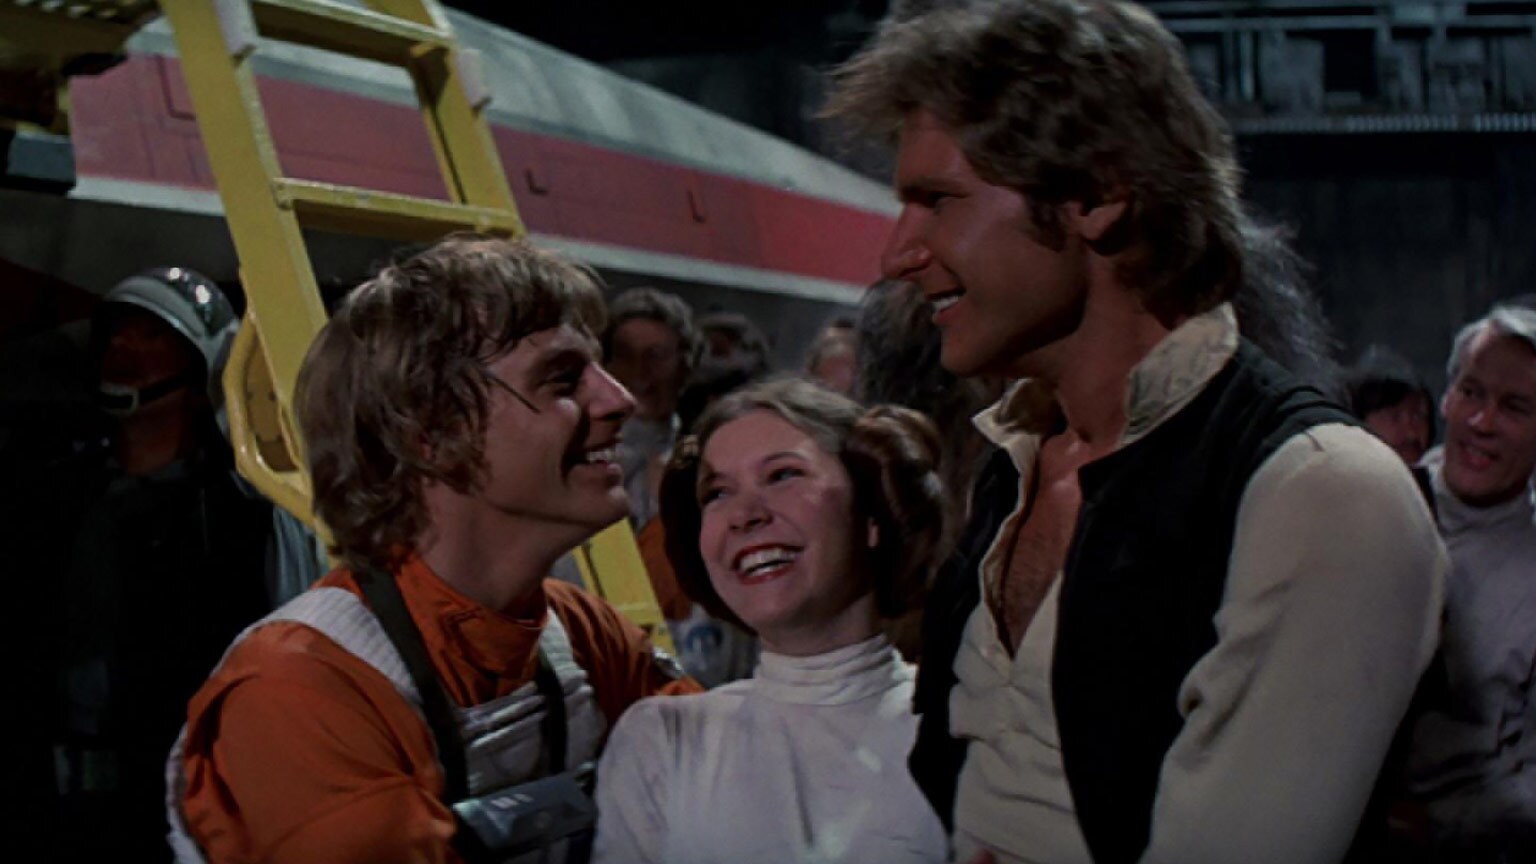 On the Comlink: What Does Star Wars Mean to You?